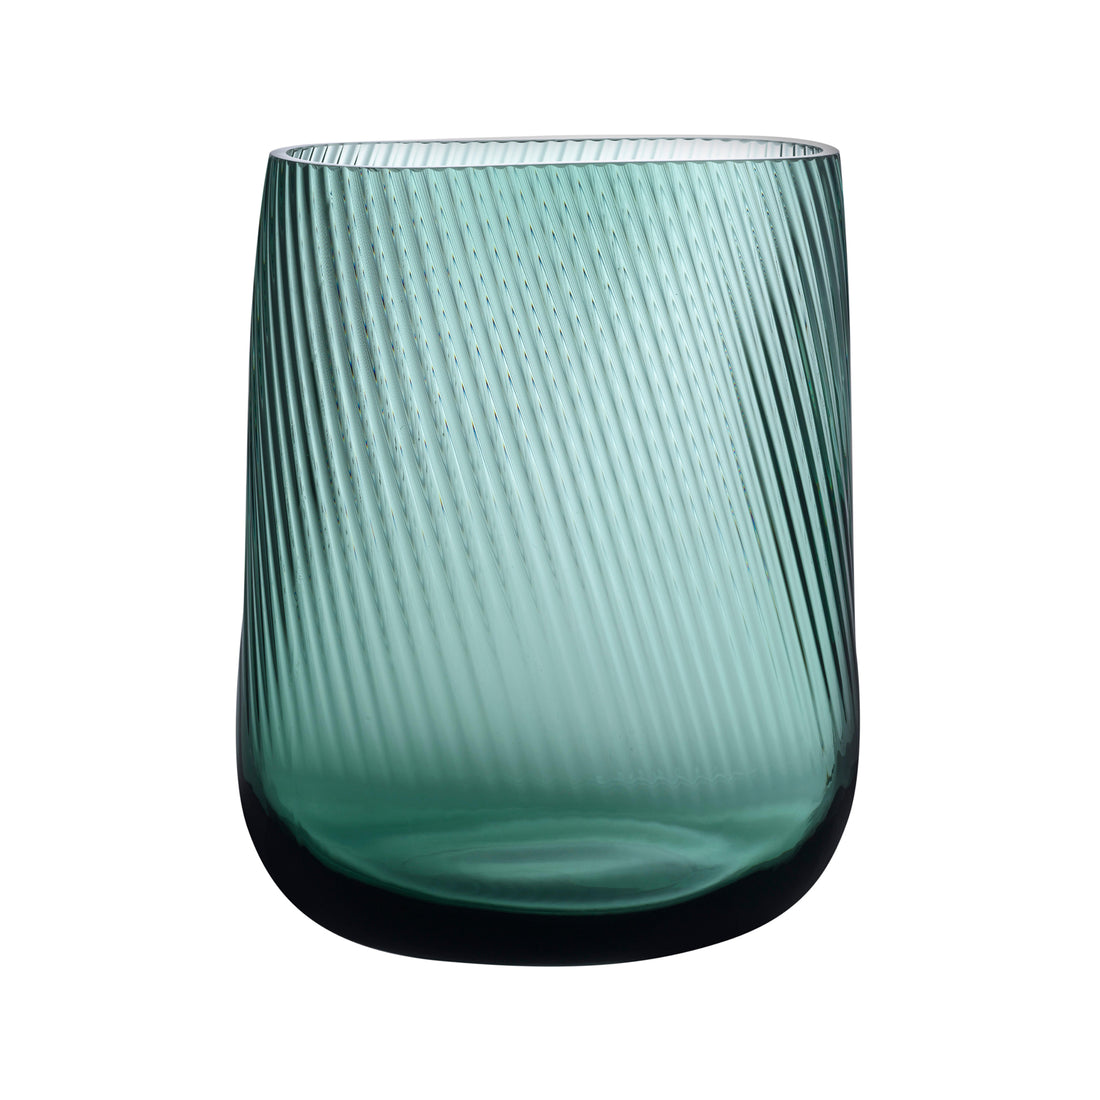 Opti Vase Tall by Defne Koz for NUDE in smoked green